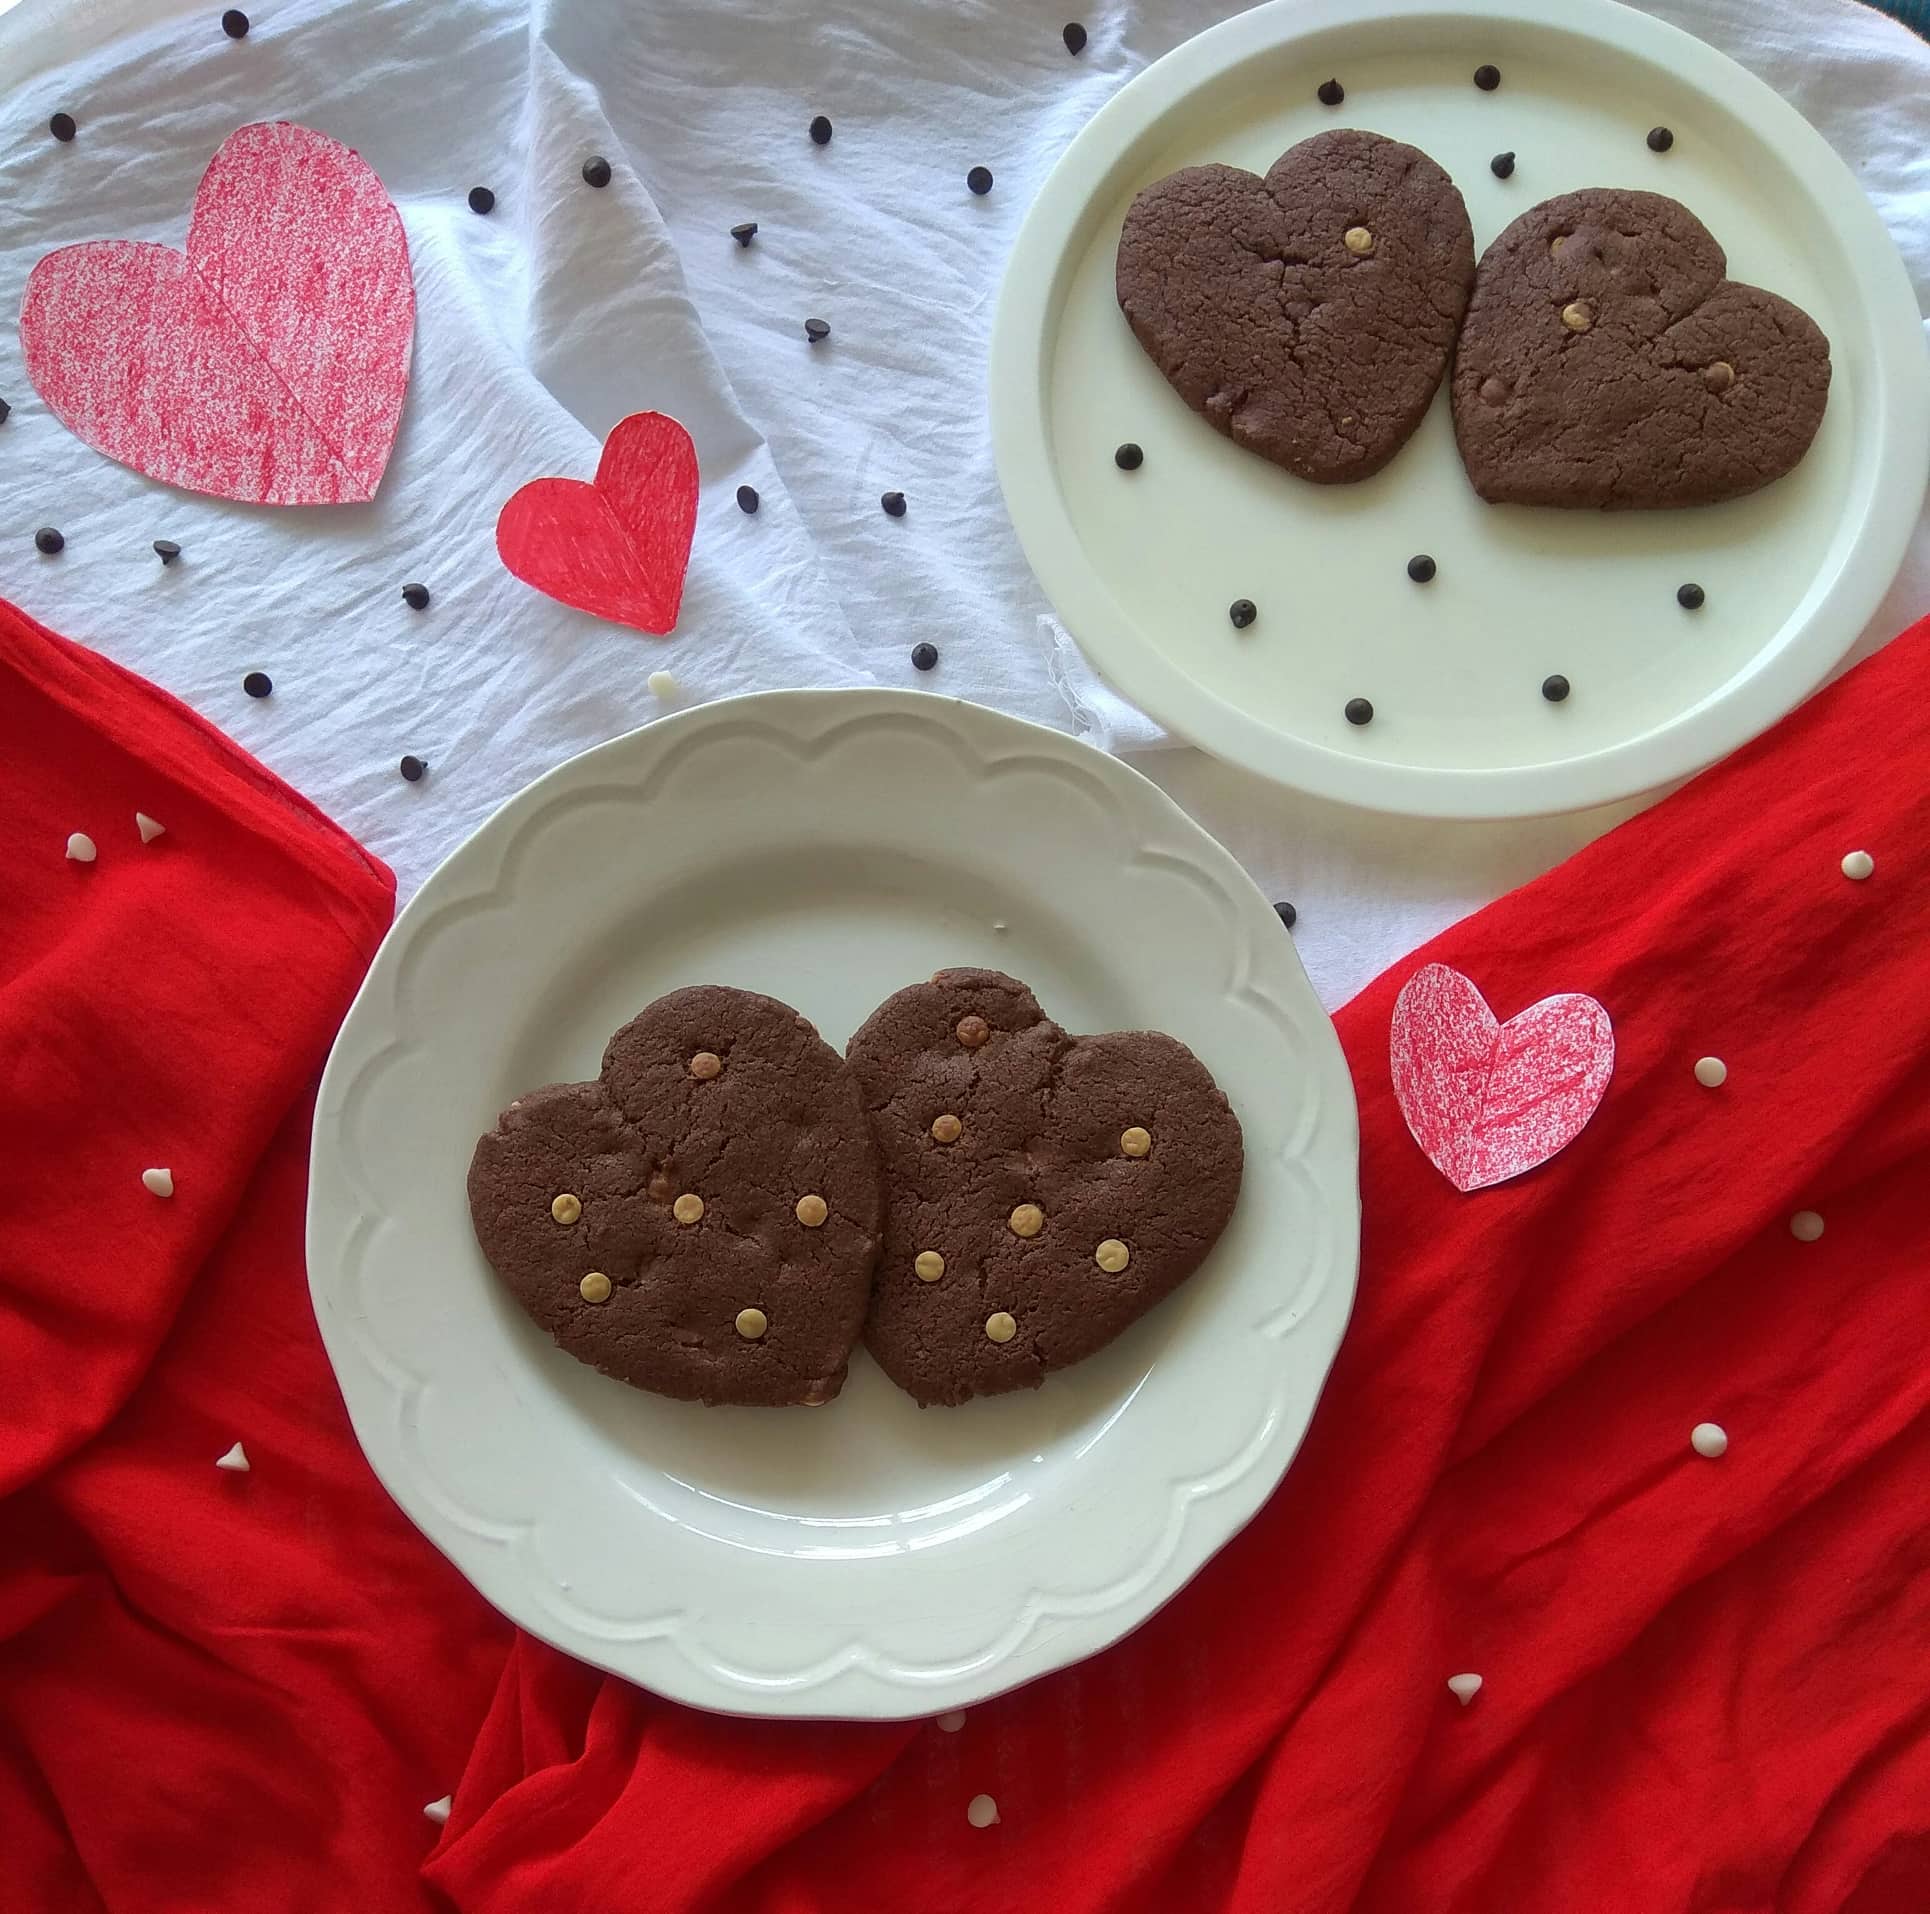 Heart Shaped Choco Chip Cookies With Beetroot Juice.